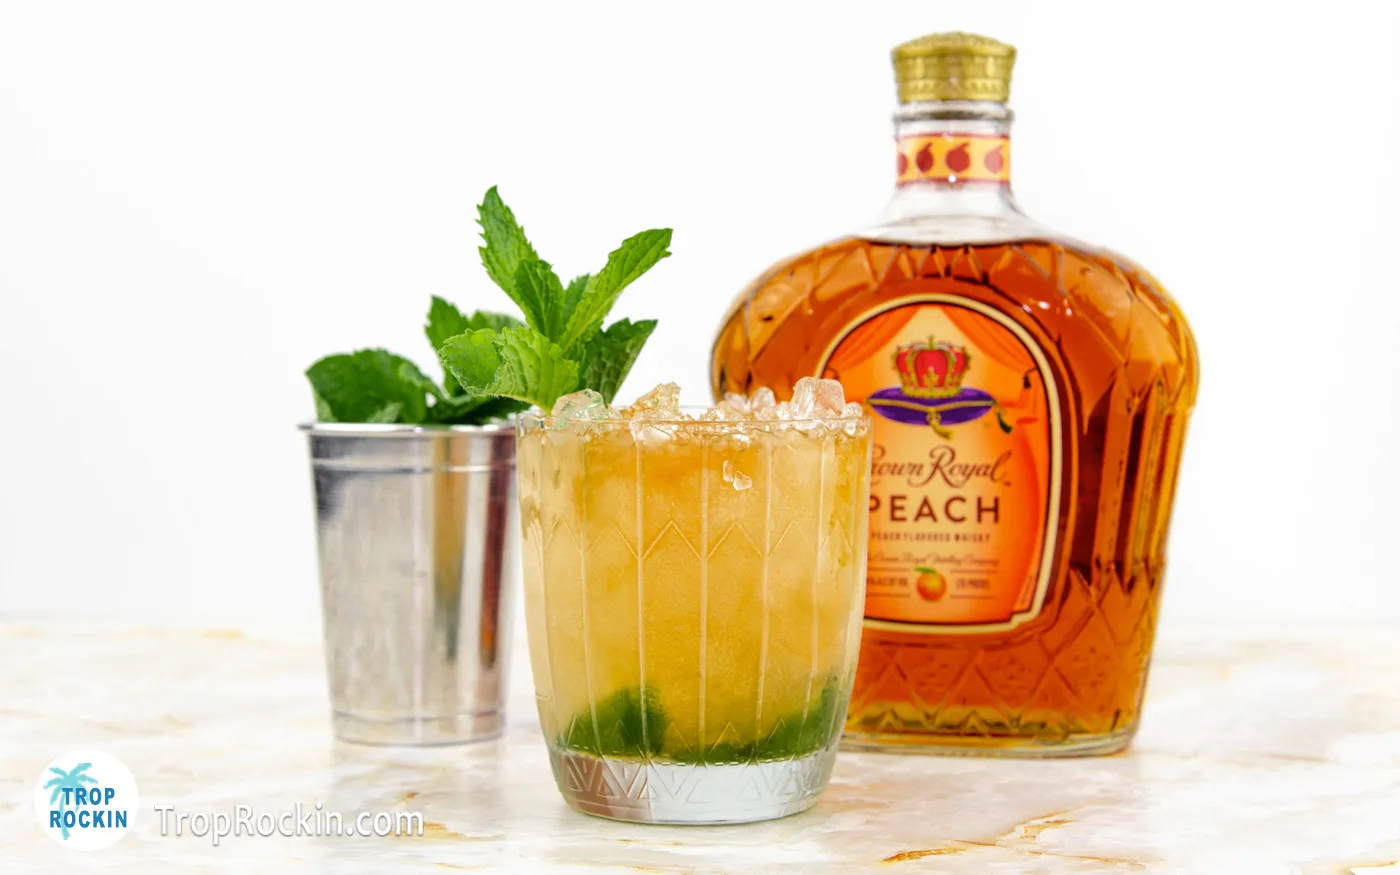 Crown Royal Peach Mint Julep with a Crown Peach bottle and cup of fresh mint in the background.